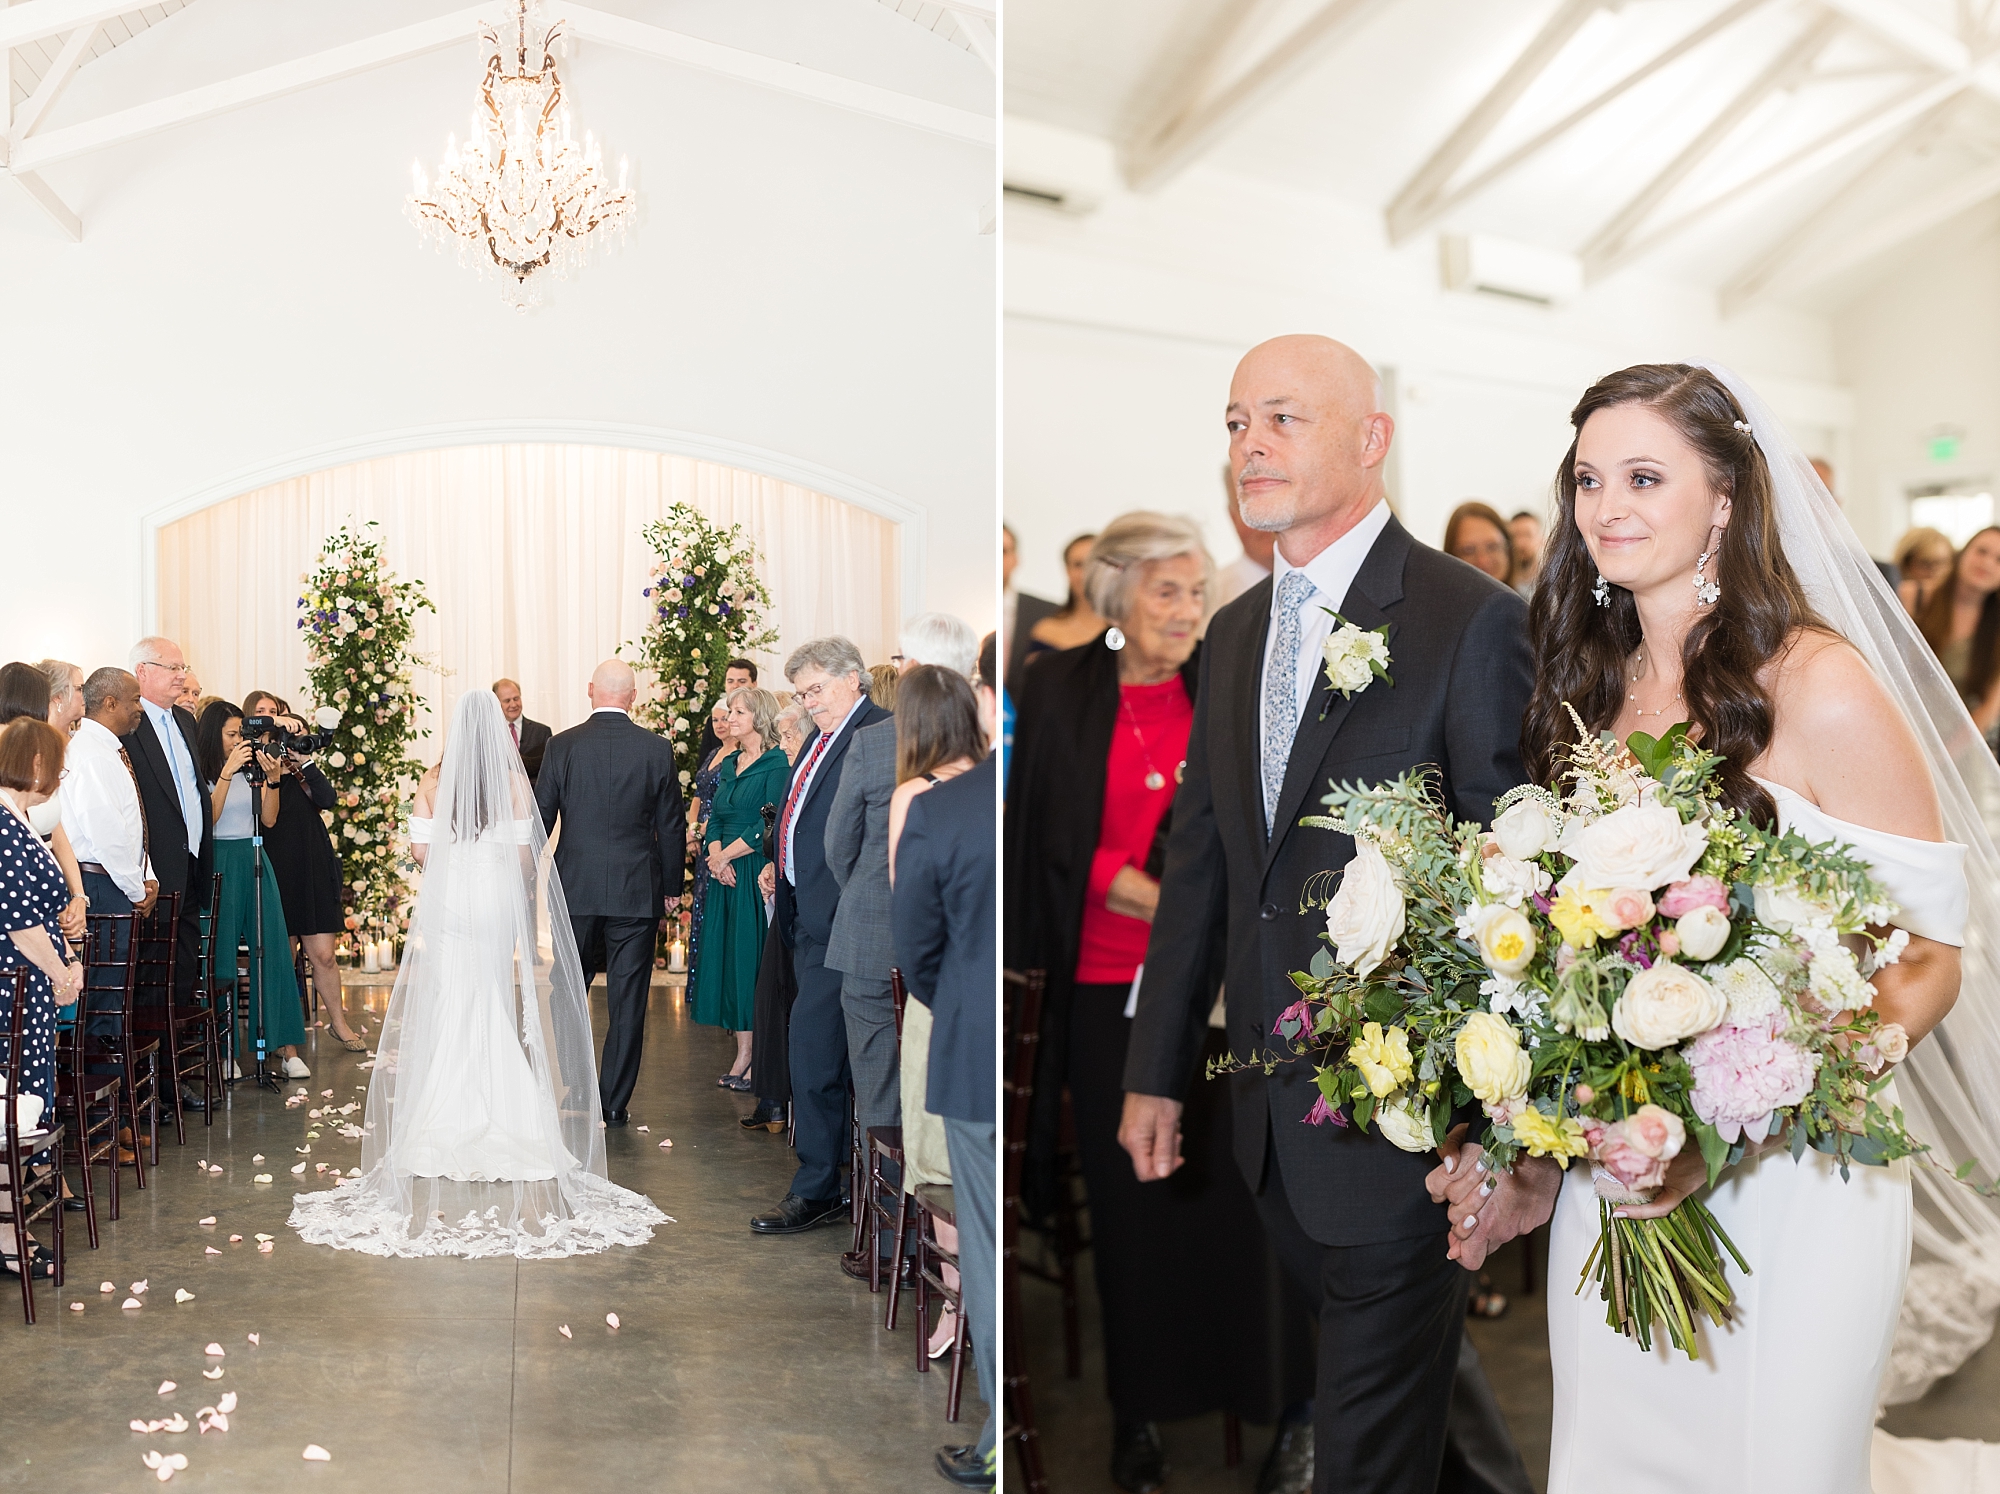 The bride walking down the aisle with her father | Merrimon Wynne Wedding | Sarah Hinckley Photography | Raleigh NC Wedding Photographer